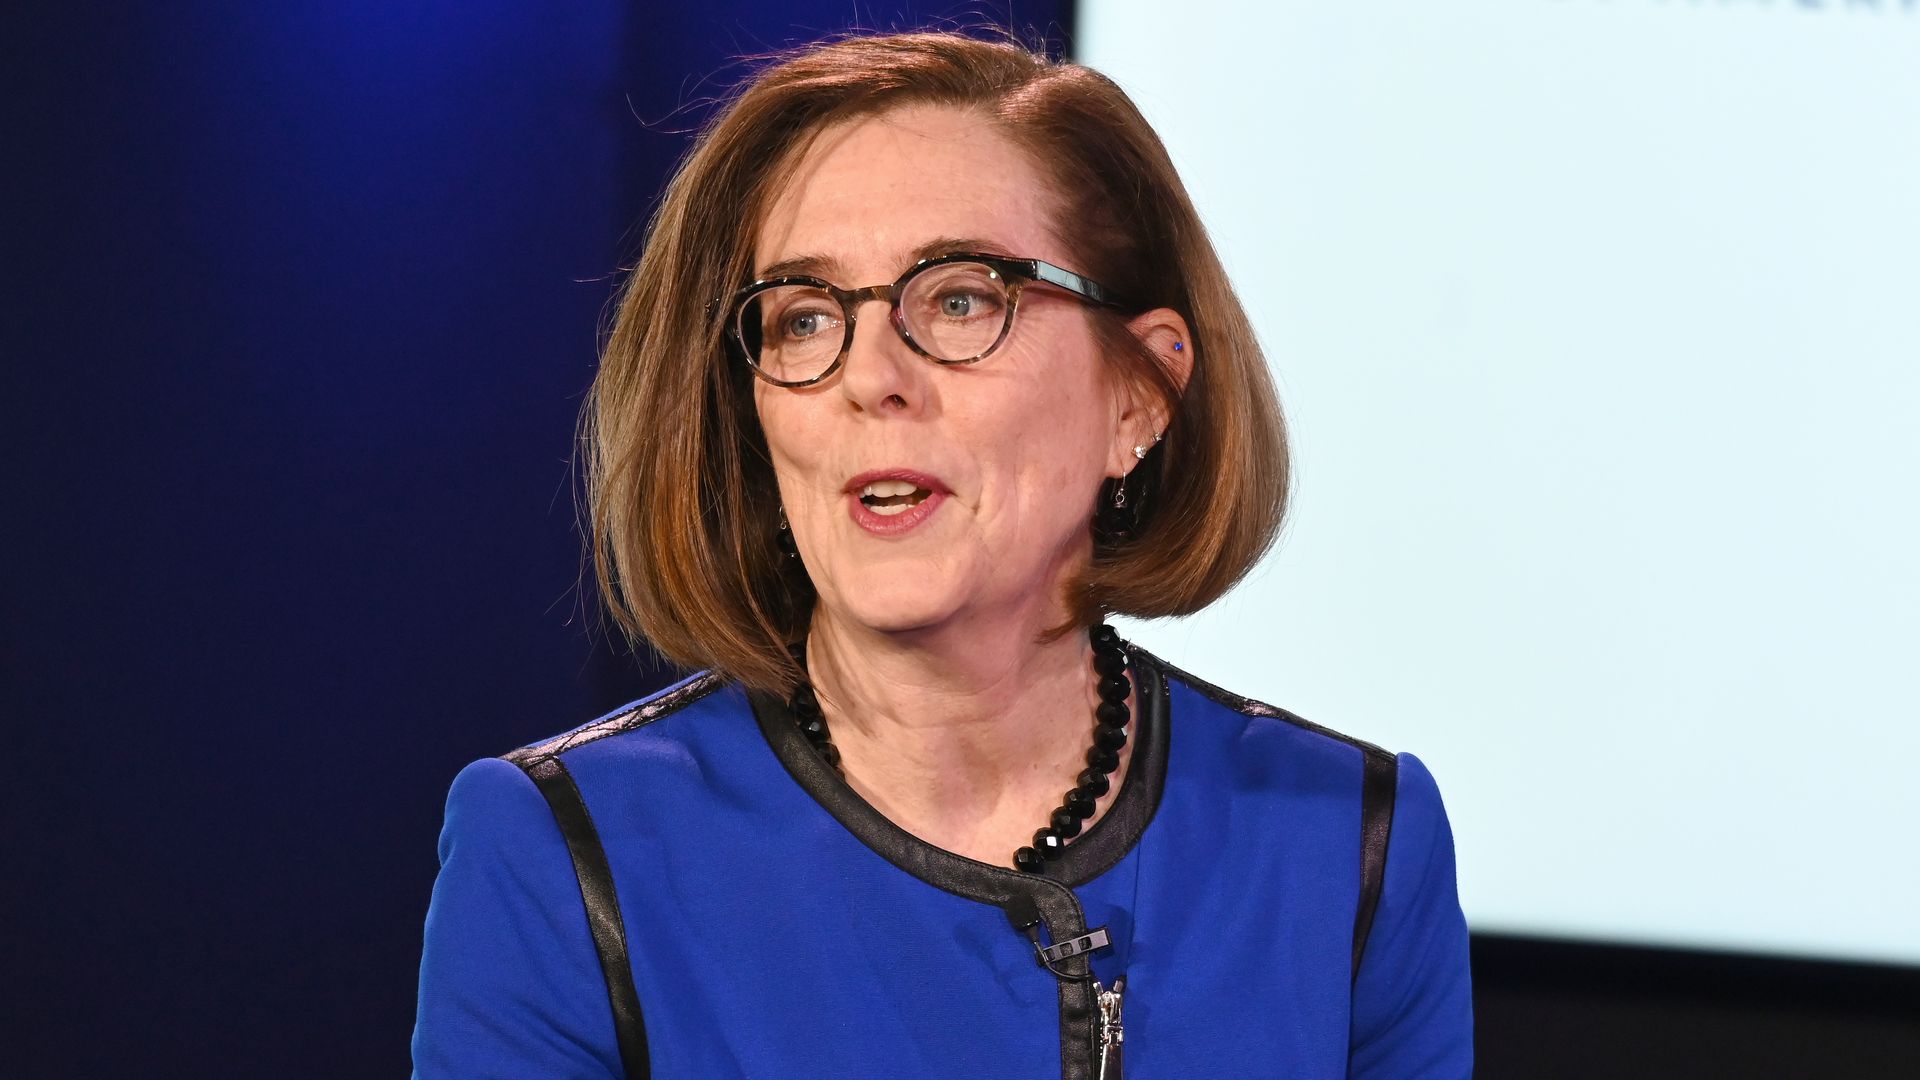 Oregon Governor Kate Brown speaks at the Axios News Shapers event on the U.S. education system on February 22, 2019 in Washington, DC. 